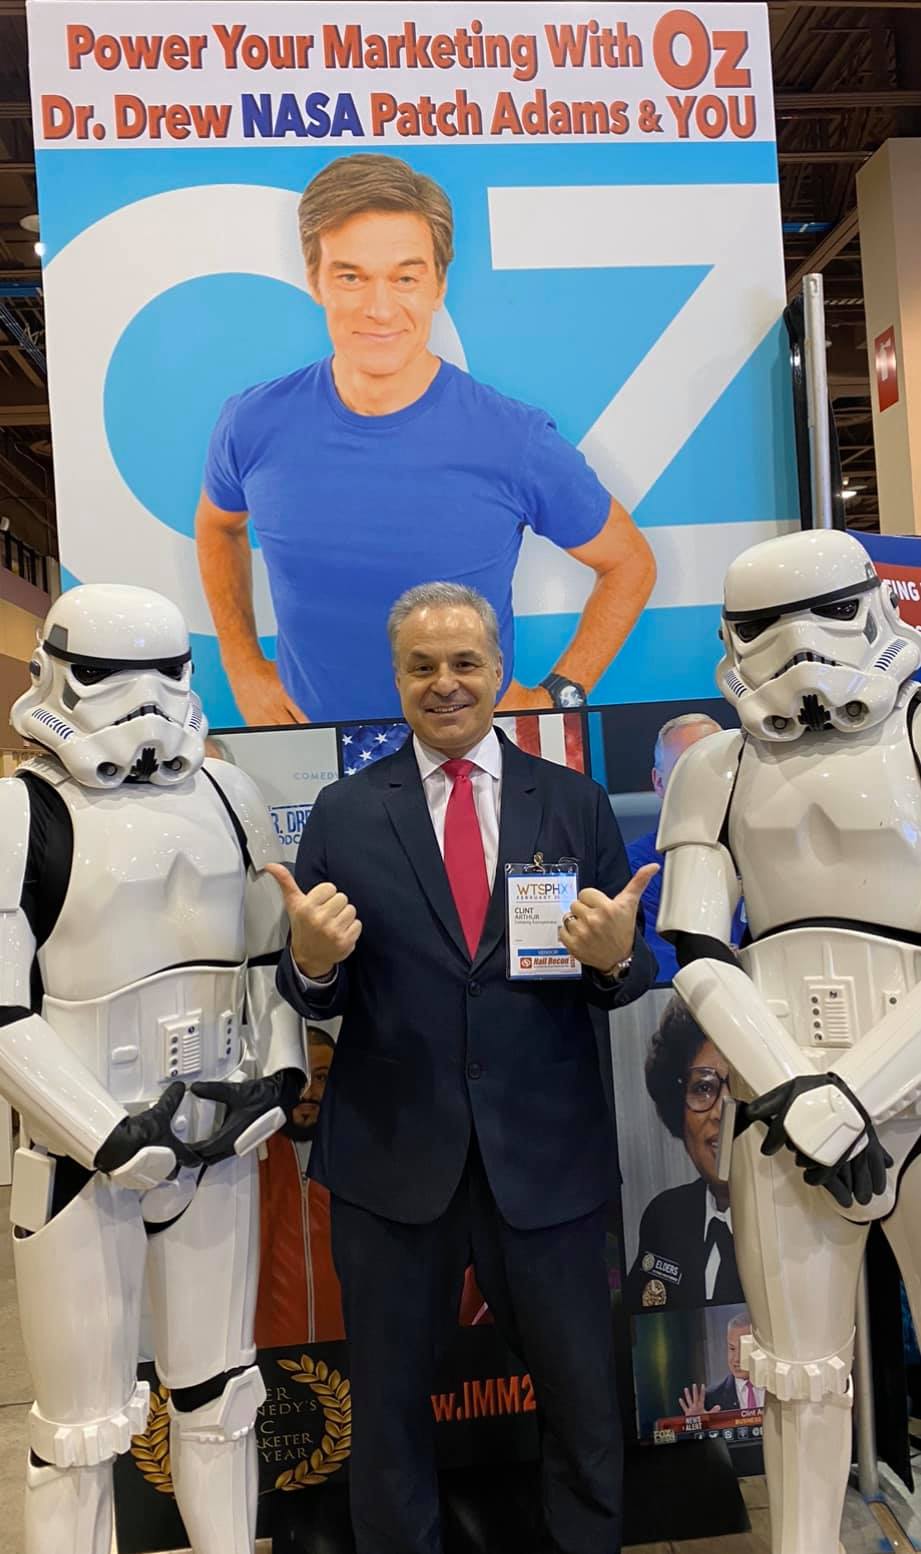 Clint Arthur with Star Wars Stormtroopers promoting his Dr. Oz event, ‘Instant Marketing Miracle’